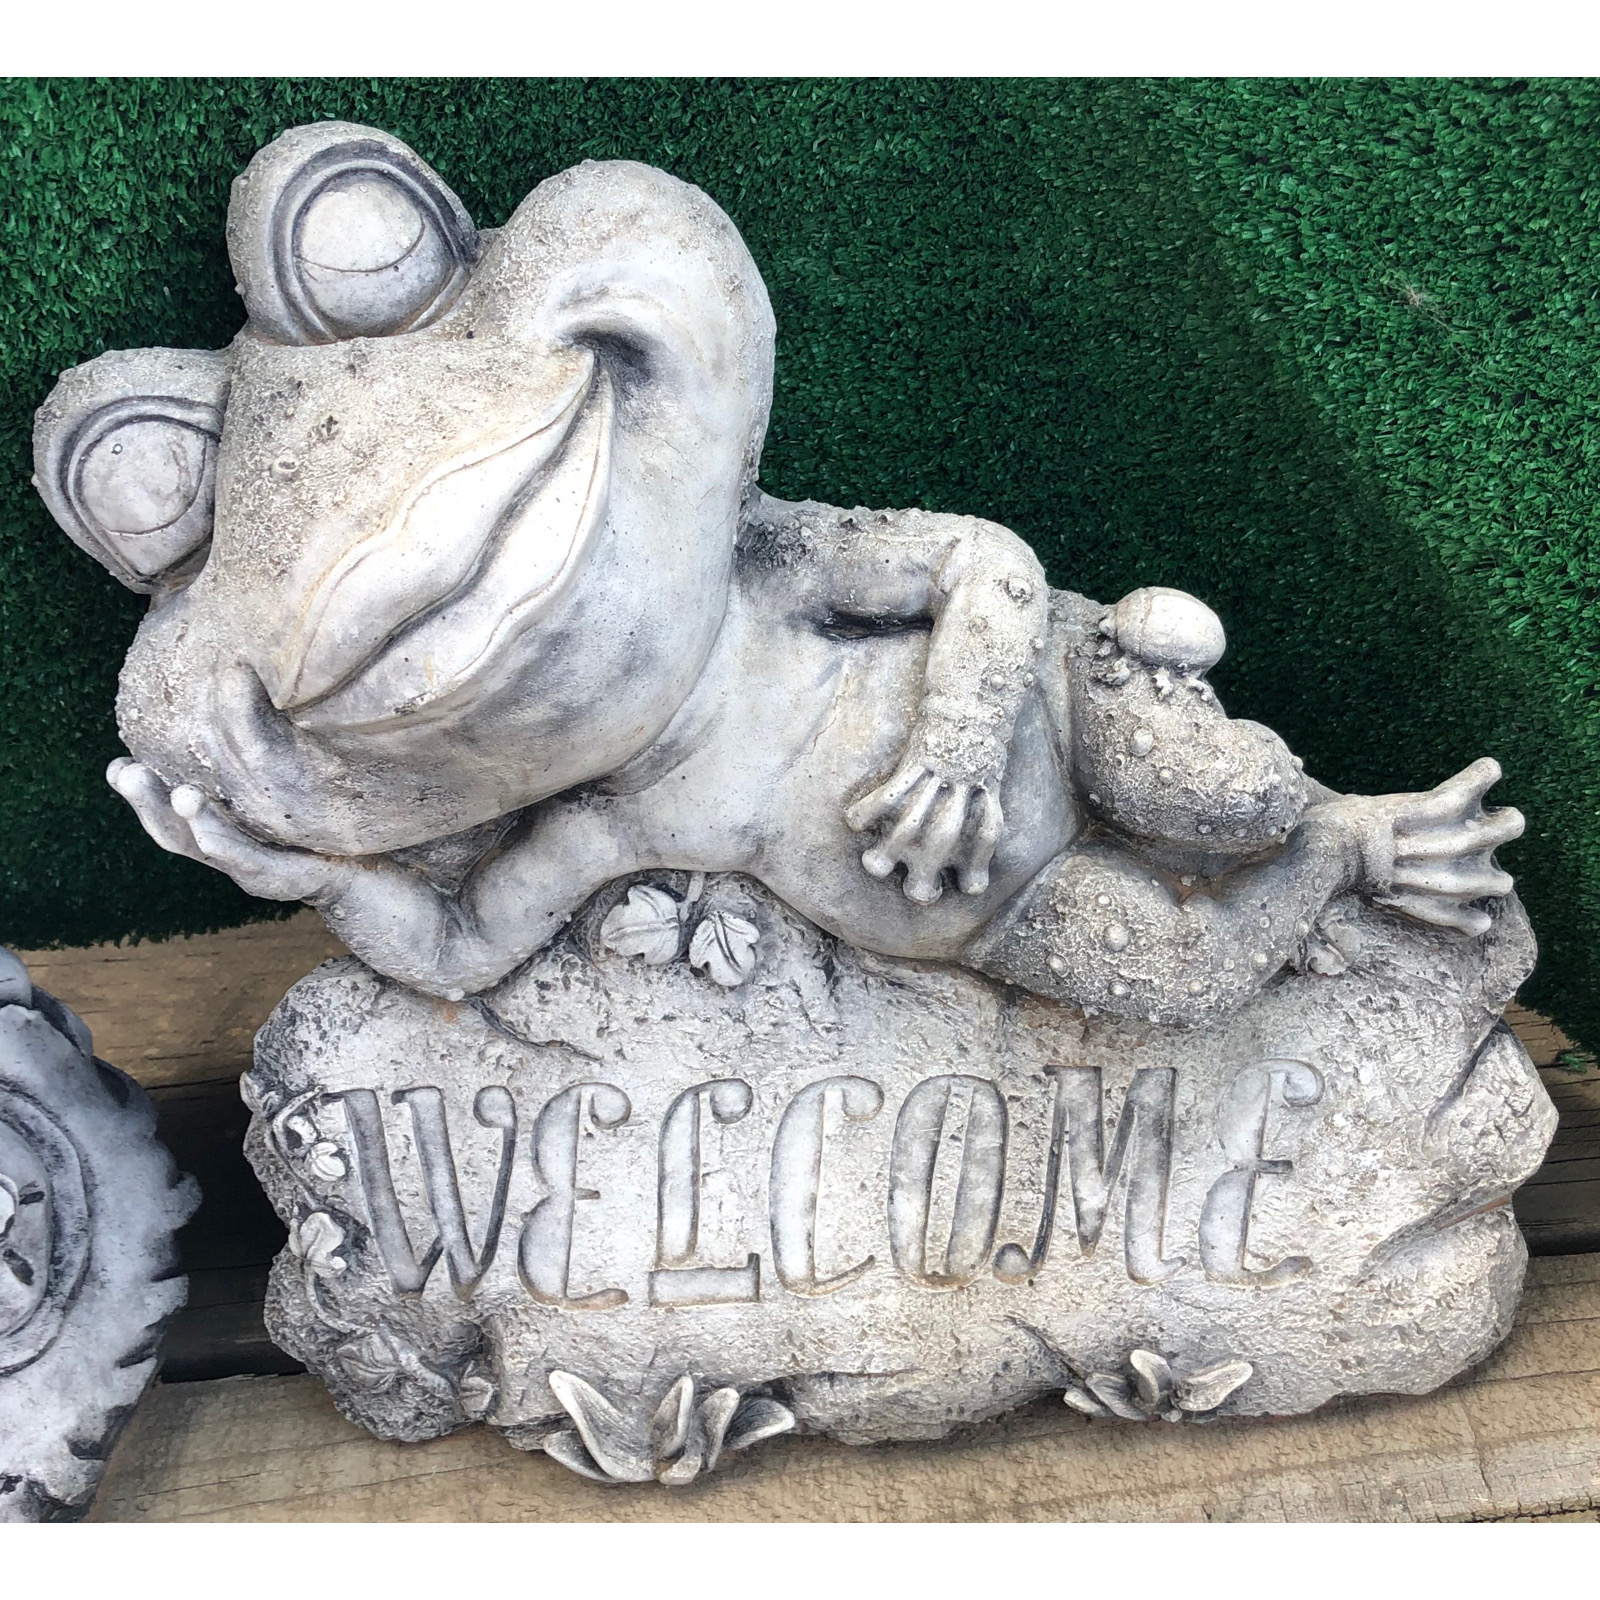 Sexy Welcome Frog Concrete Statue (1083) - Pots n Pots